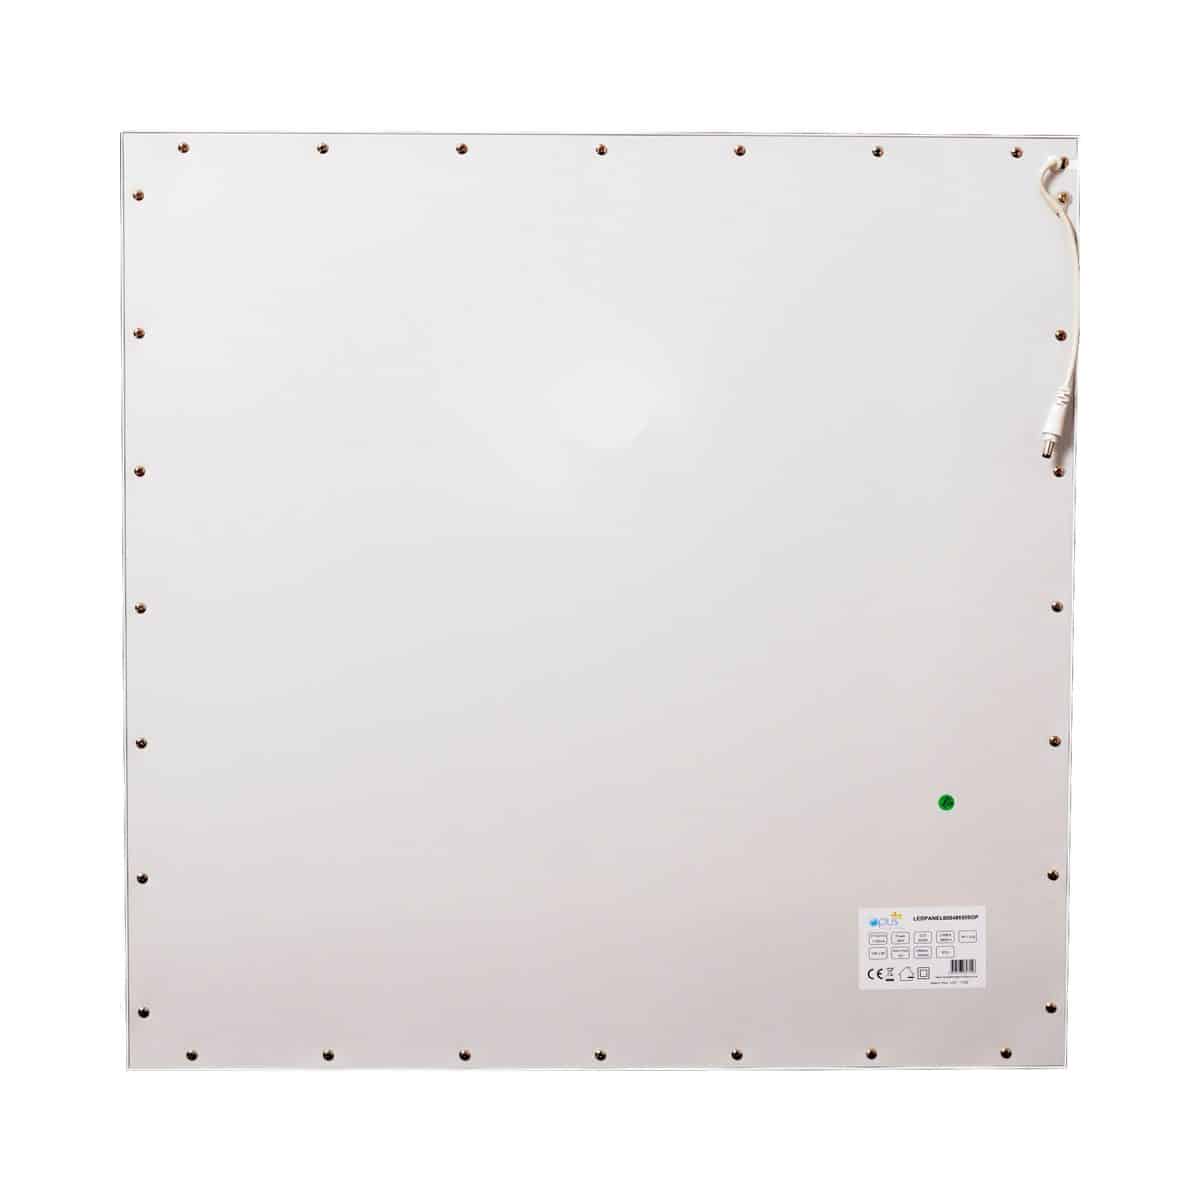 LED Recessed LED Panel 48watt 600mm x 600mm Super Bright Daylight Complete With Driver and a 3 Year Guarantee